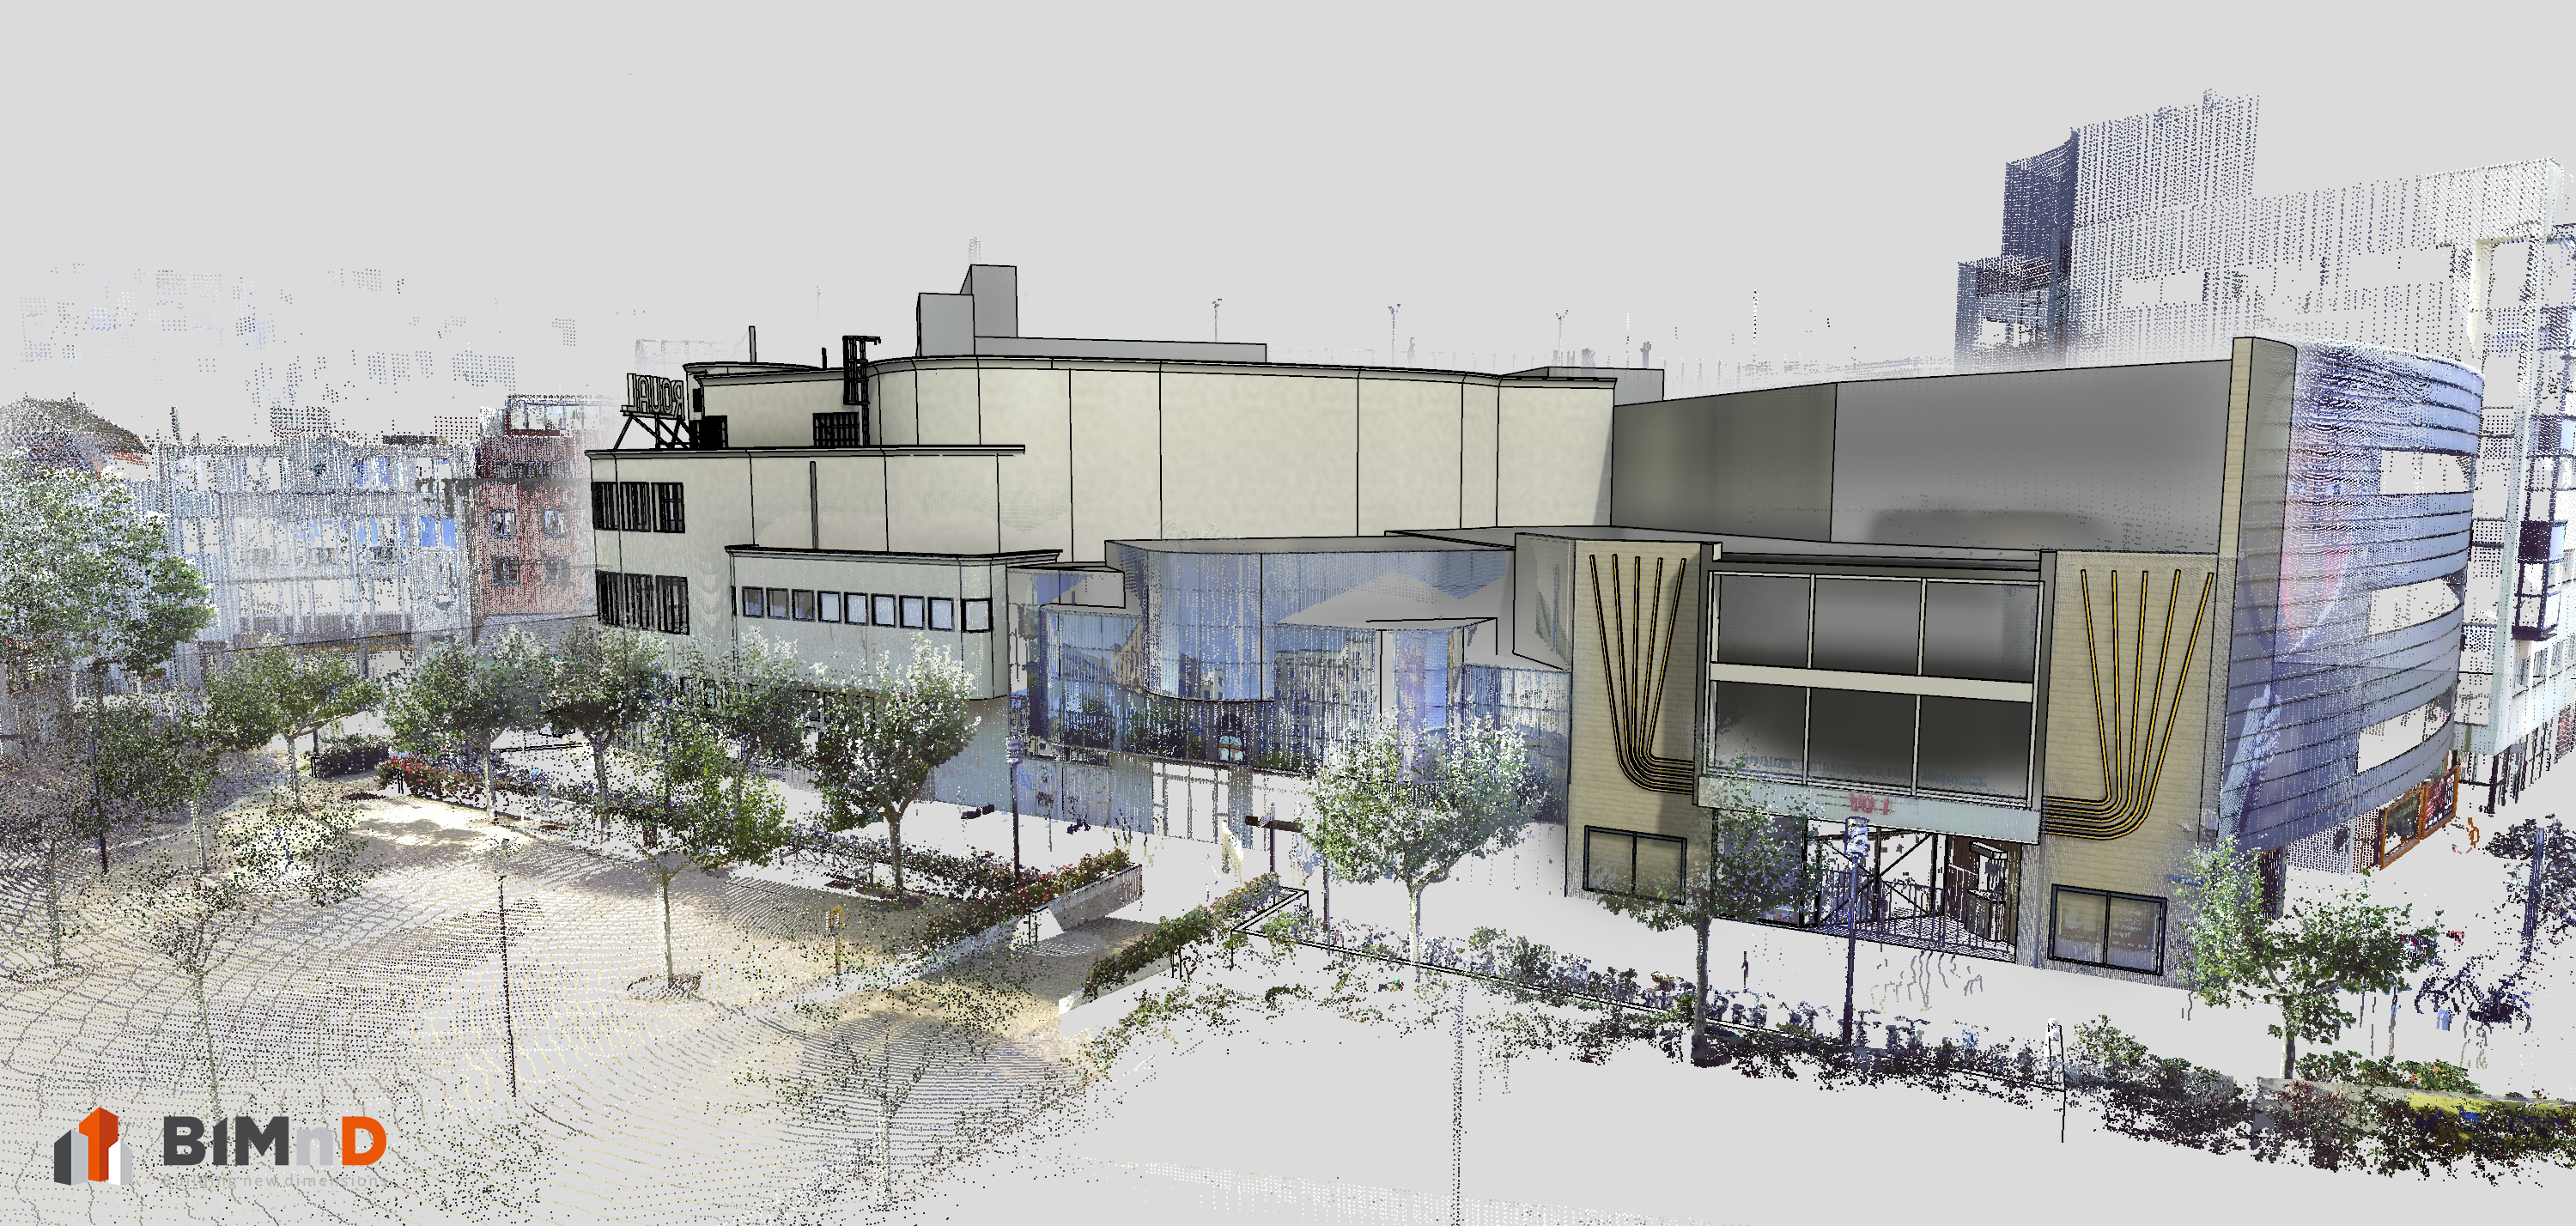 3D laser scanning and BIM for sustainability and planning theatres